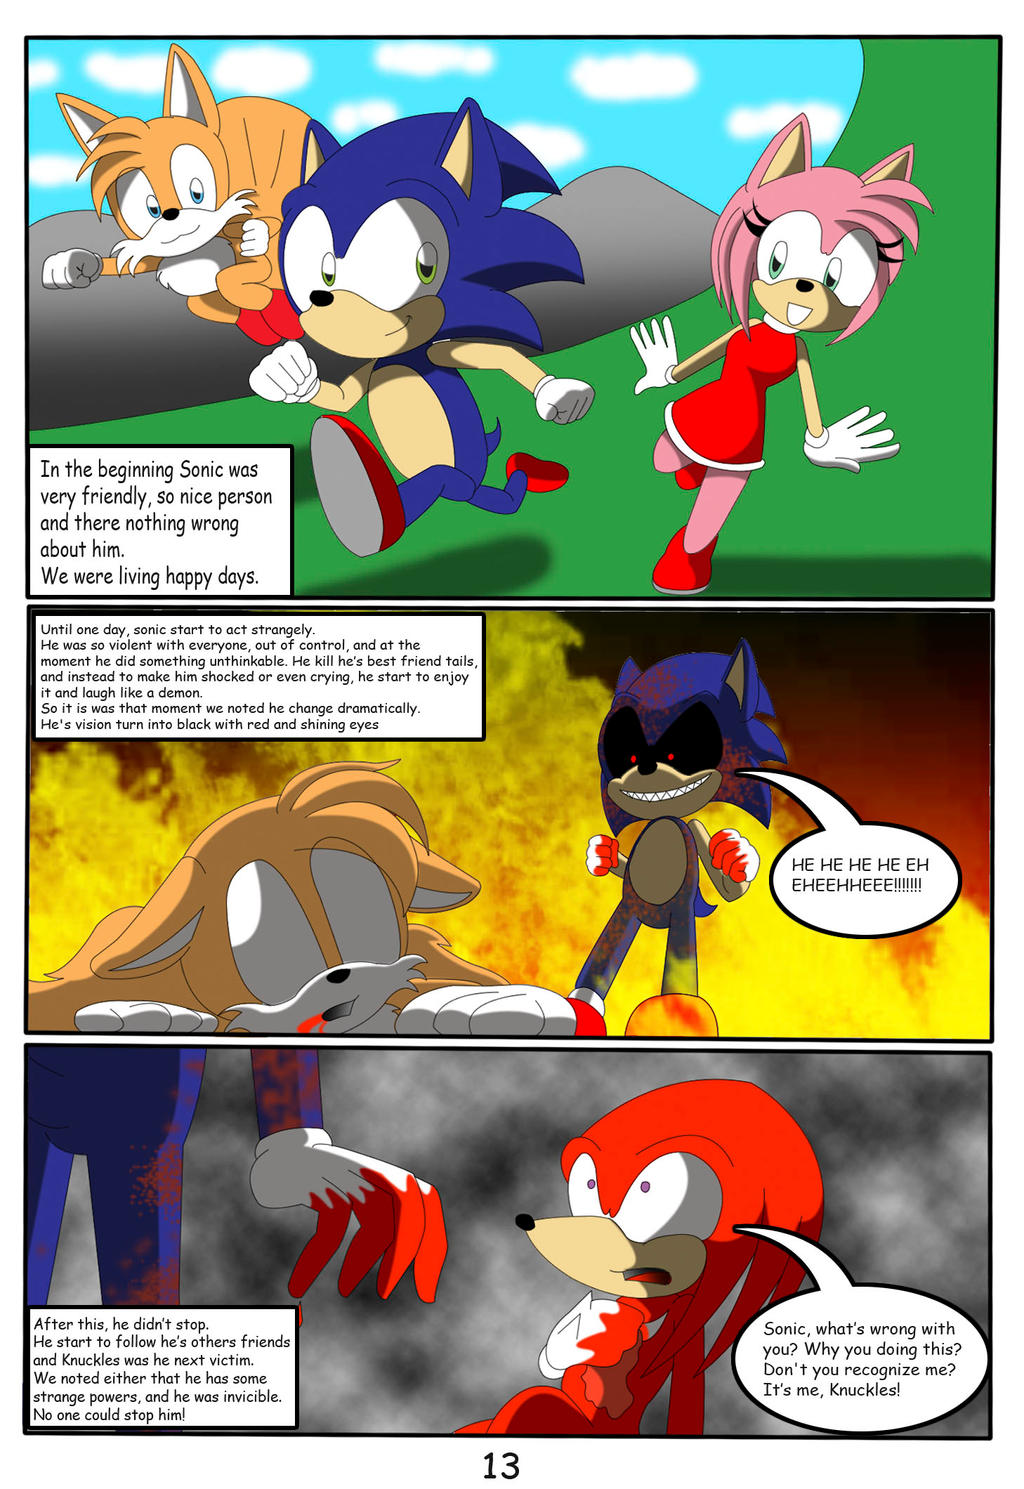 Kyo Vs Sonic Exe Page 13 By Discosaeba On Deviantart free images, download ...